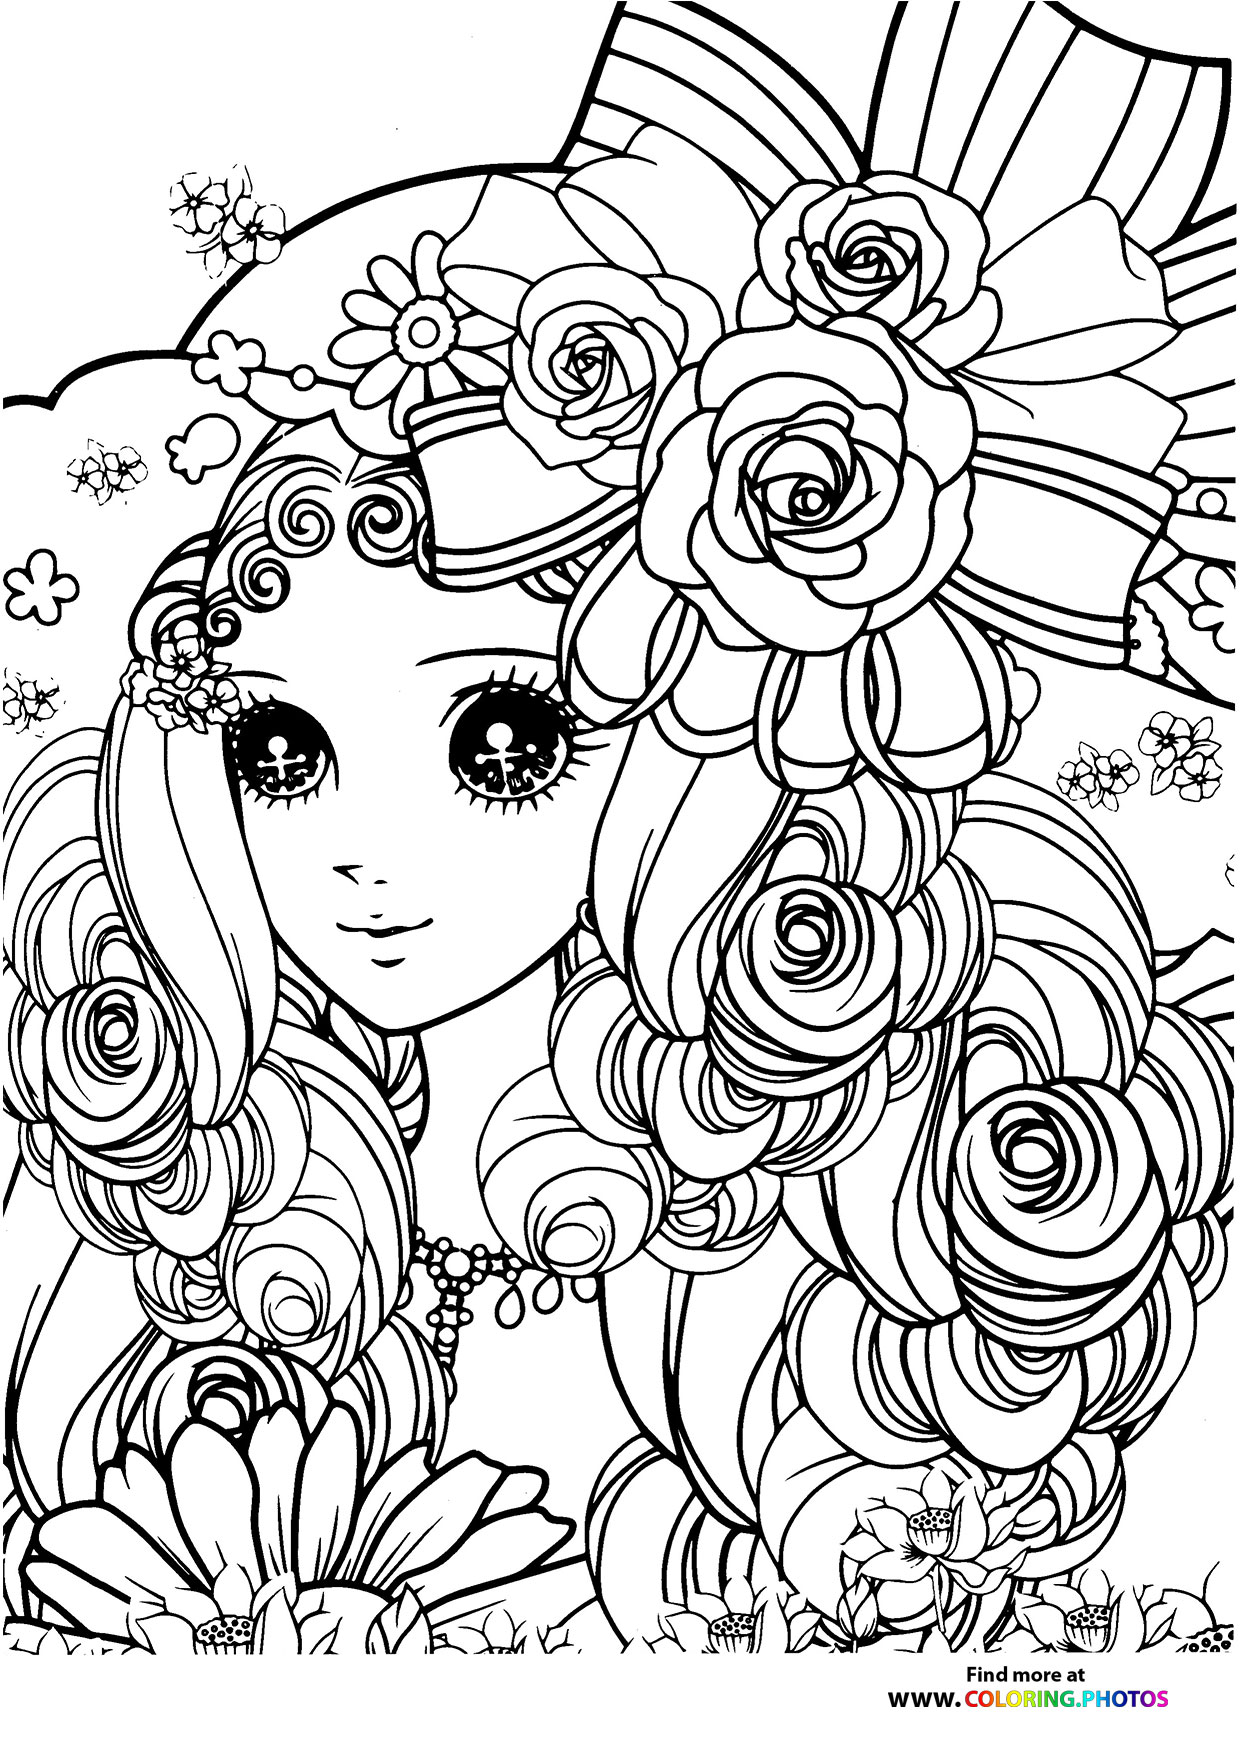 Girl-12 coloring page for Adults - Coloring Pages for kids